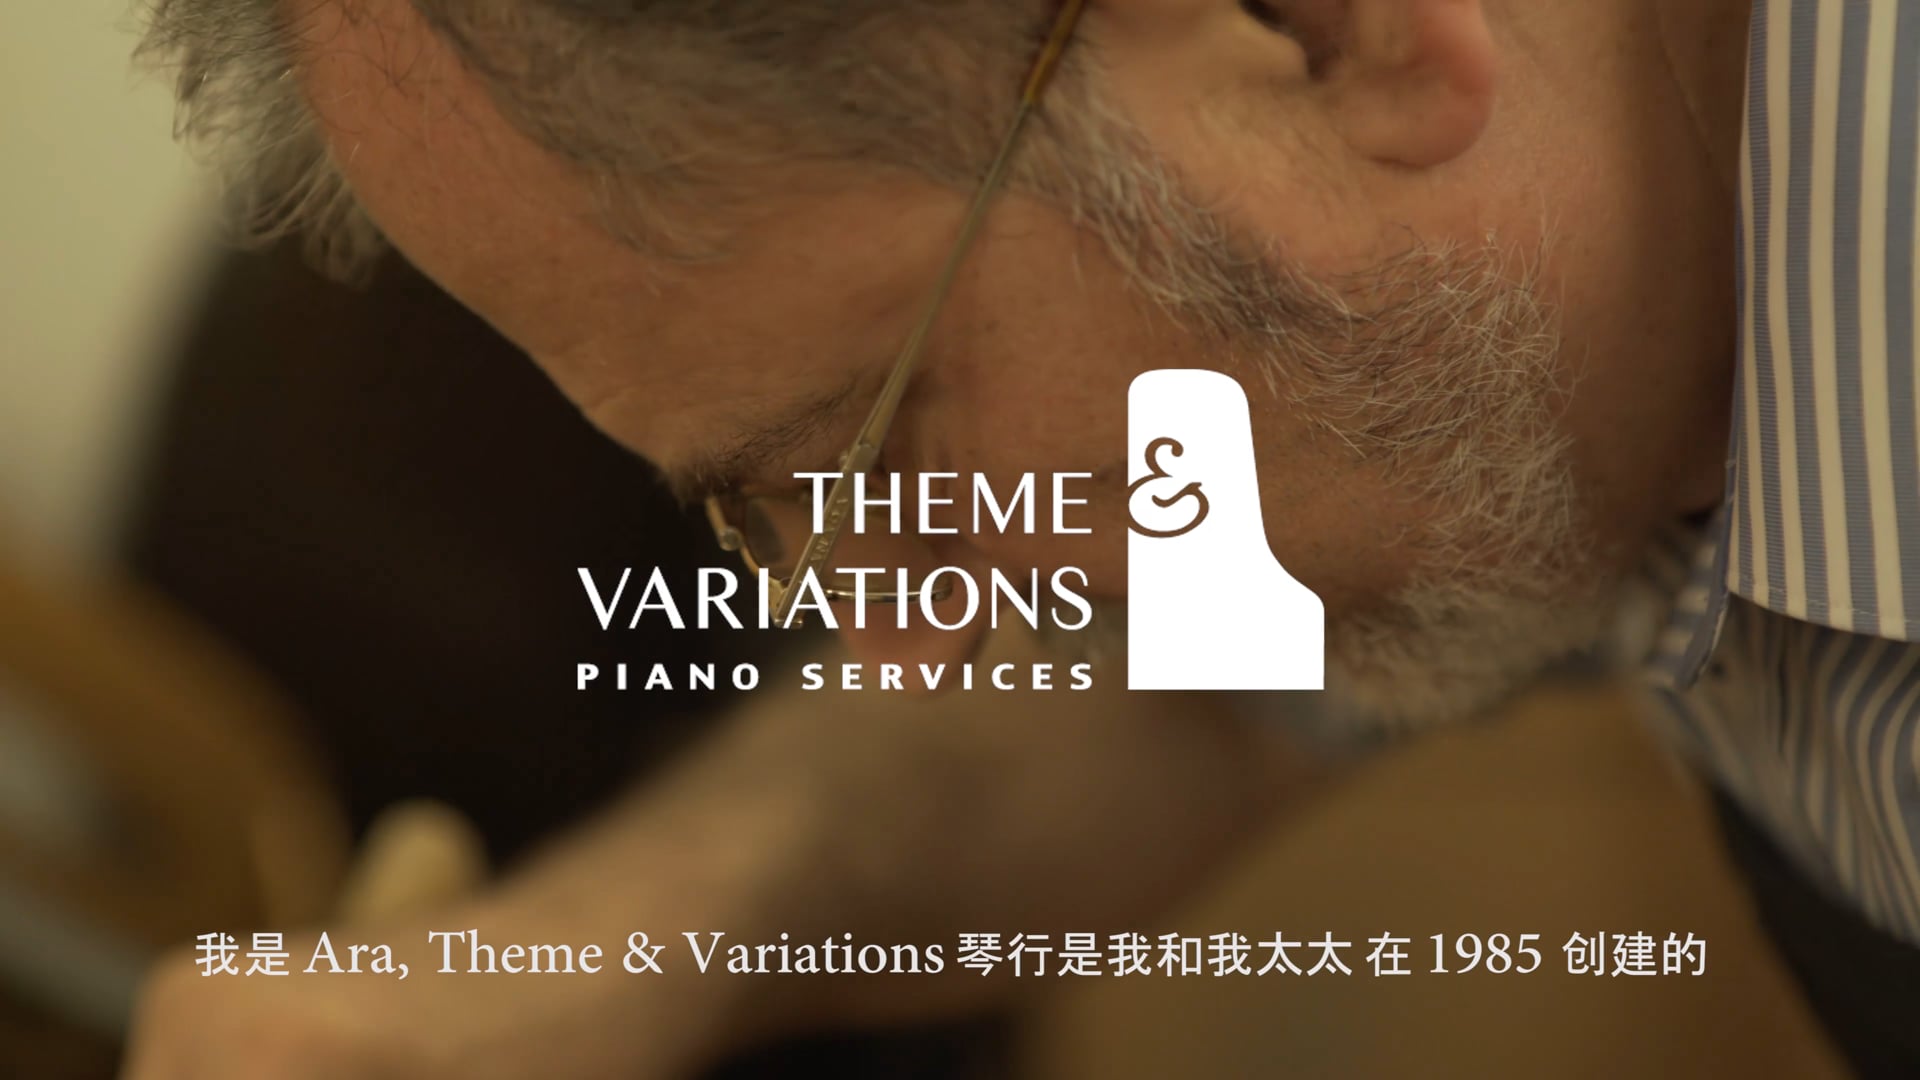 THEMES AND VARIATIONS :: PIANO SERVICES